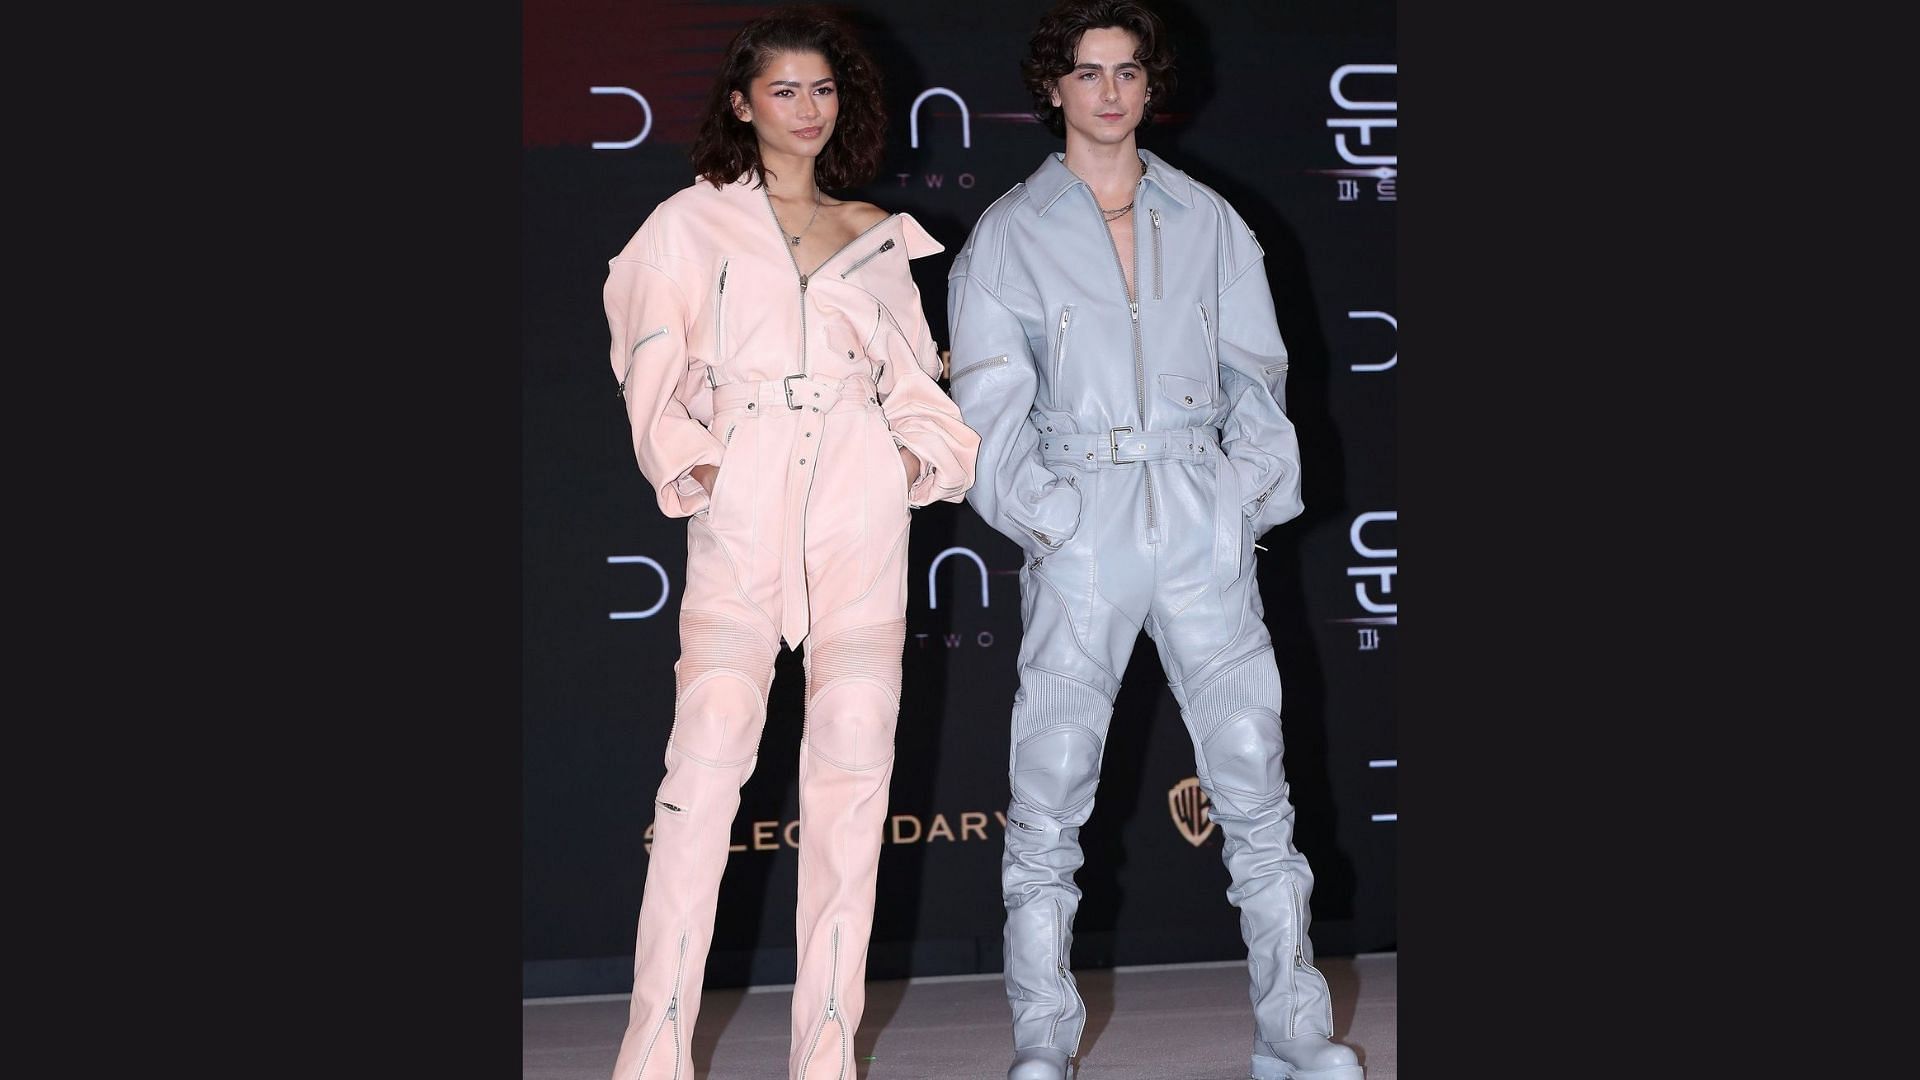 Zendaya and Timothee Chalamet wore matching outfits for the latest Dune 2 premiere, fans applaud